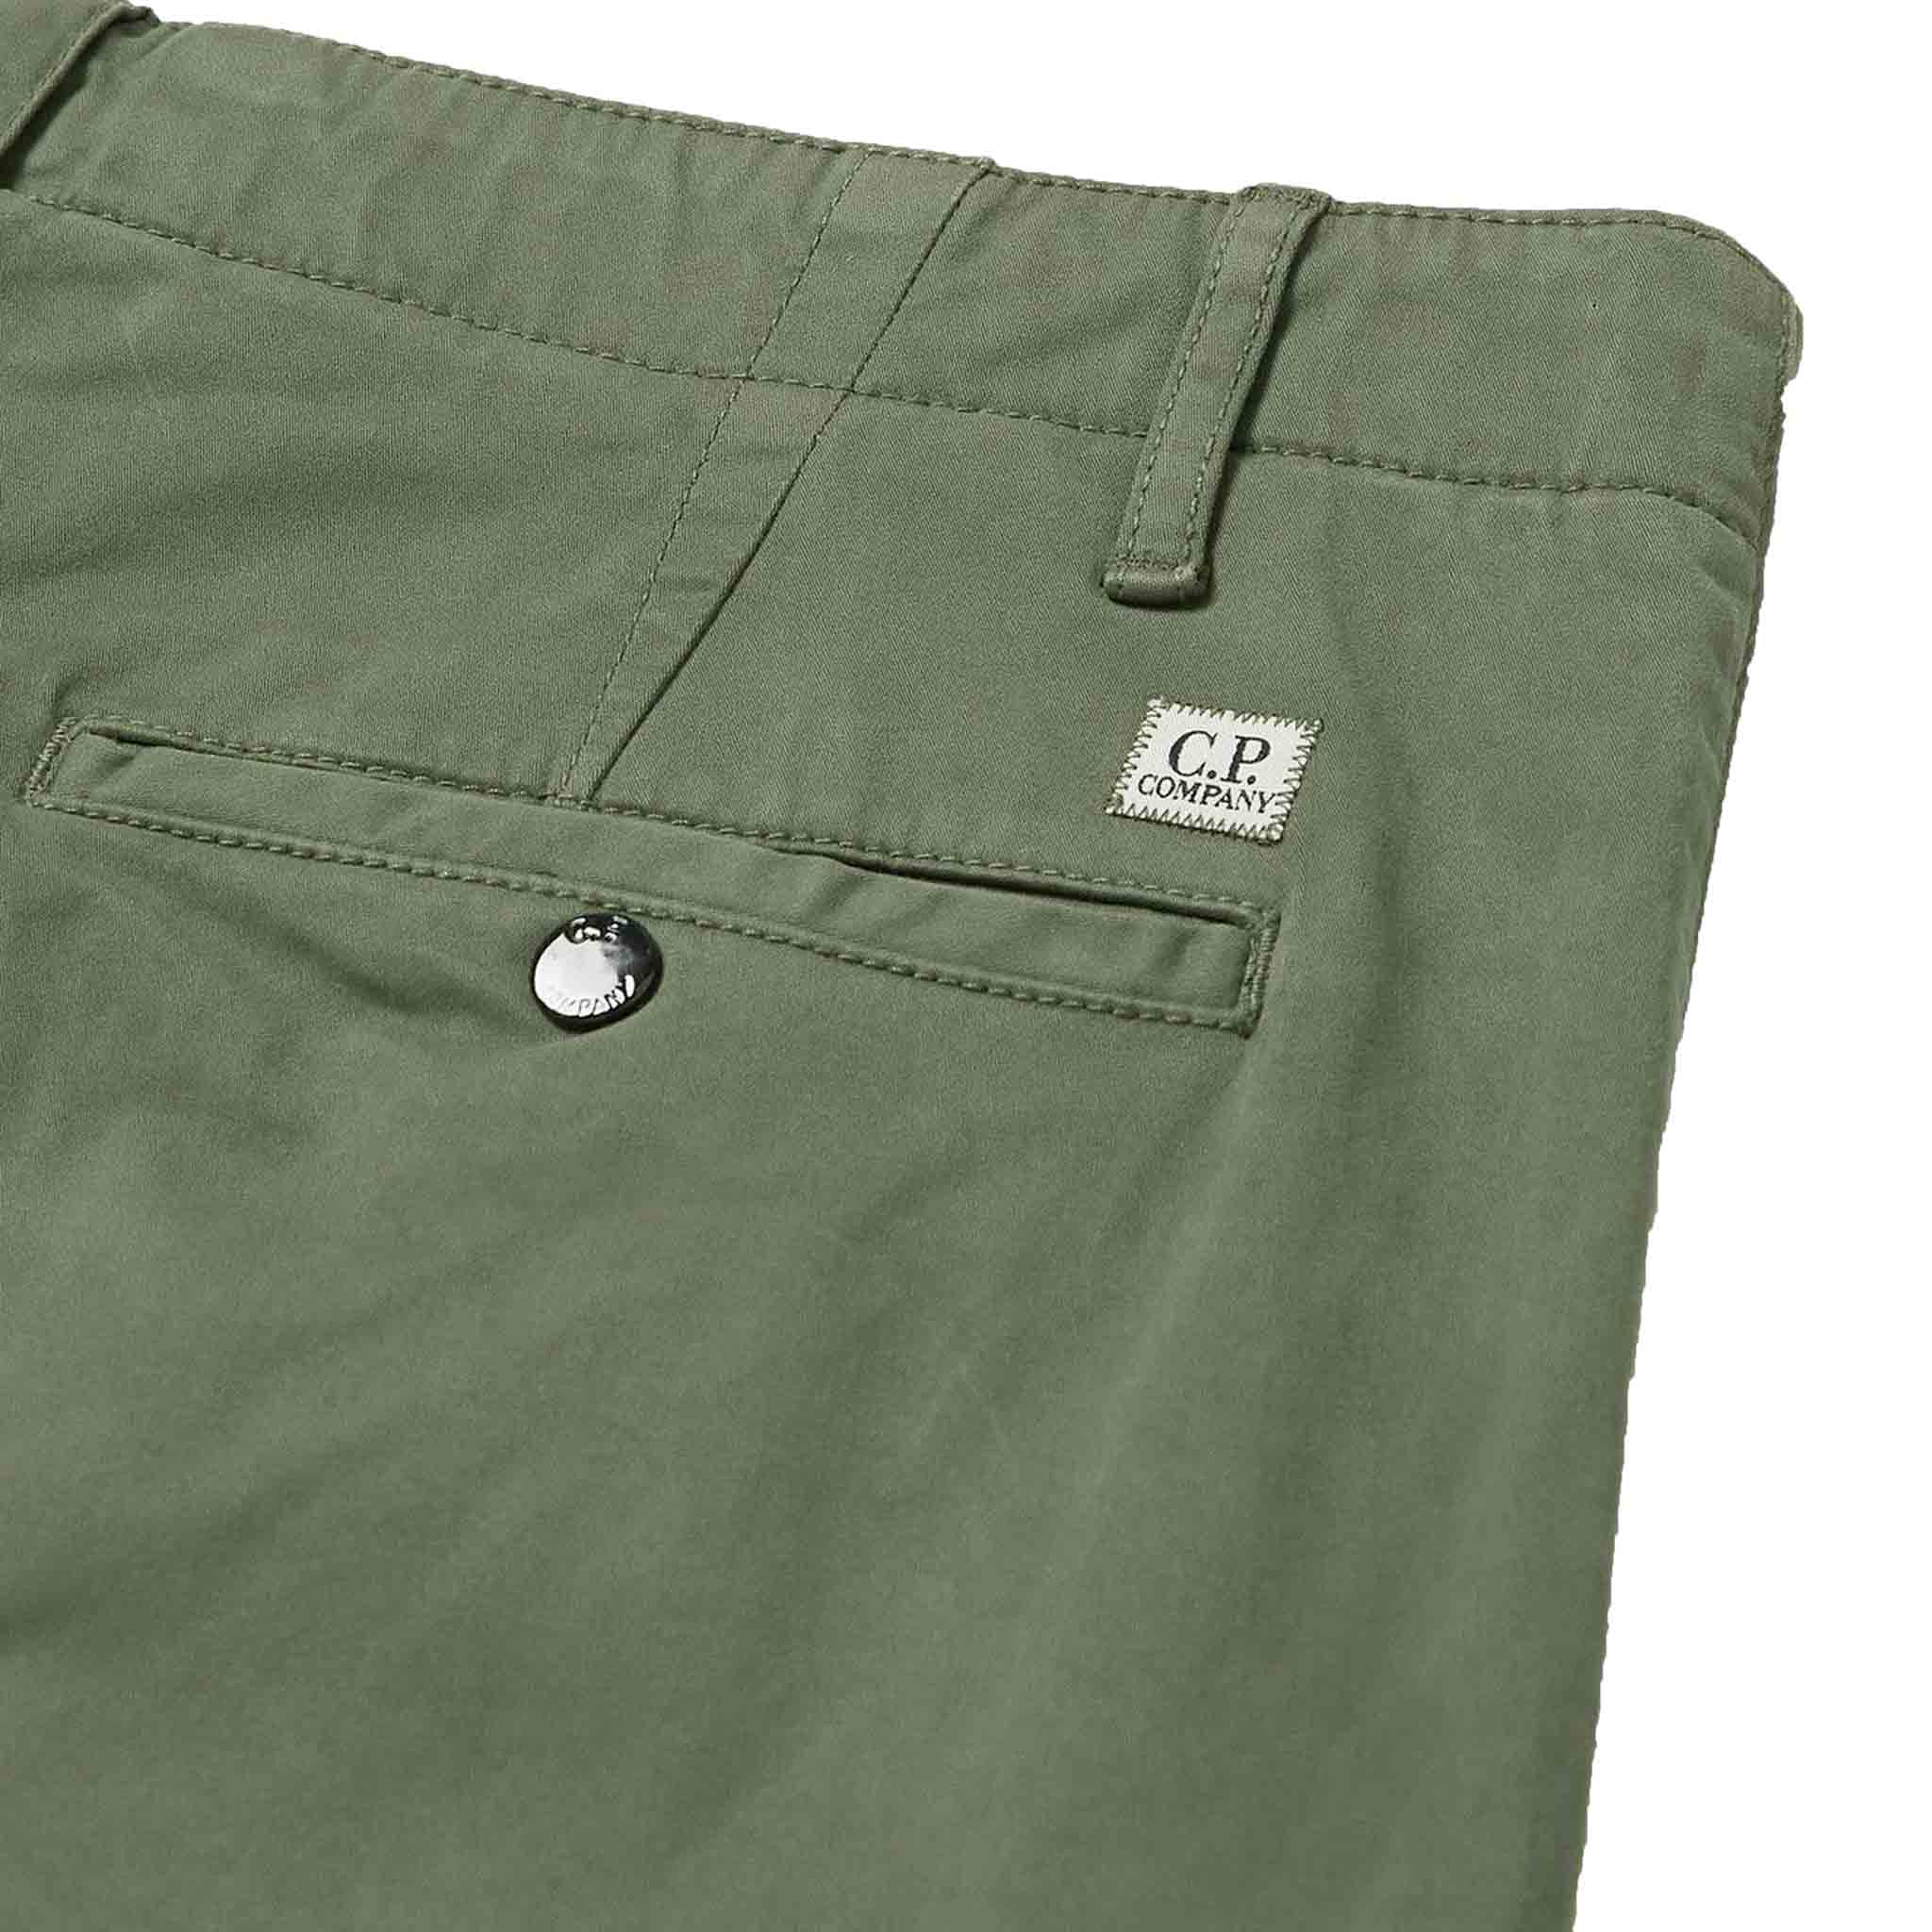 C.P. Company Stretch Sateen Cargo Pants in Bronze Green